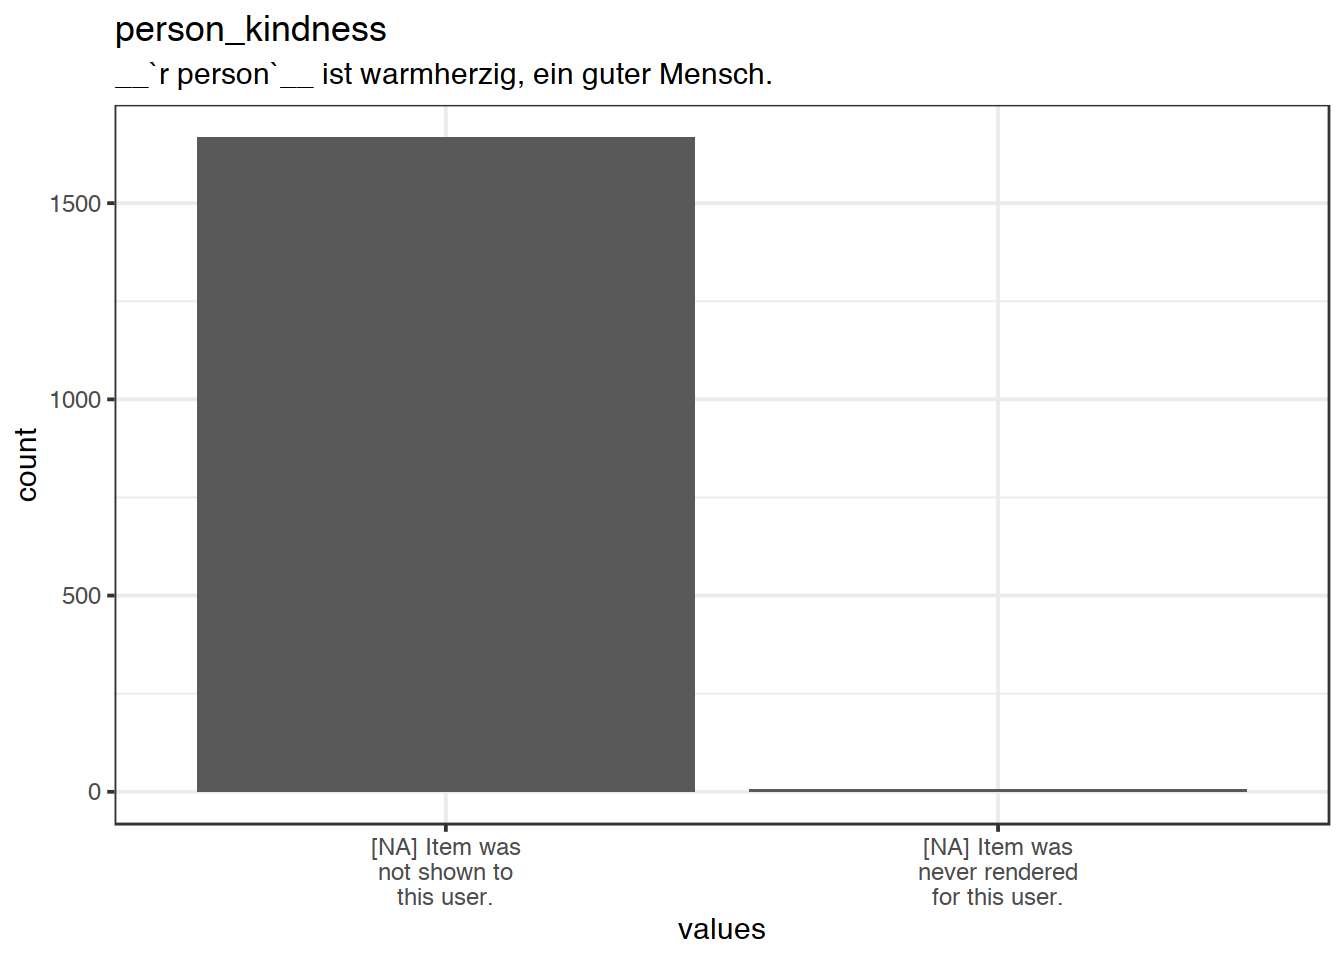 Plot of missing values for person_kindness